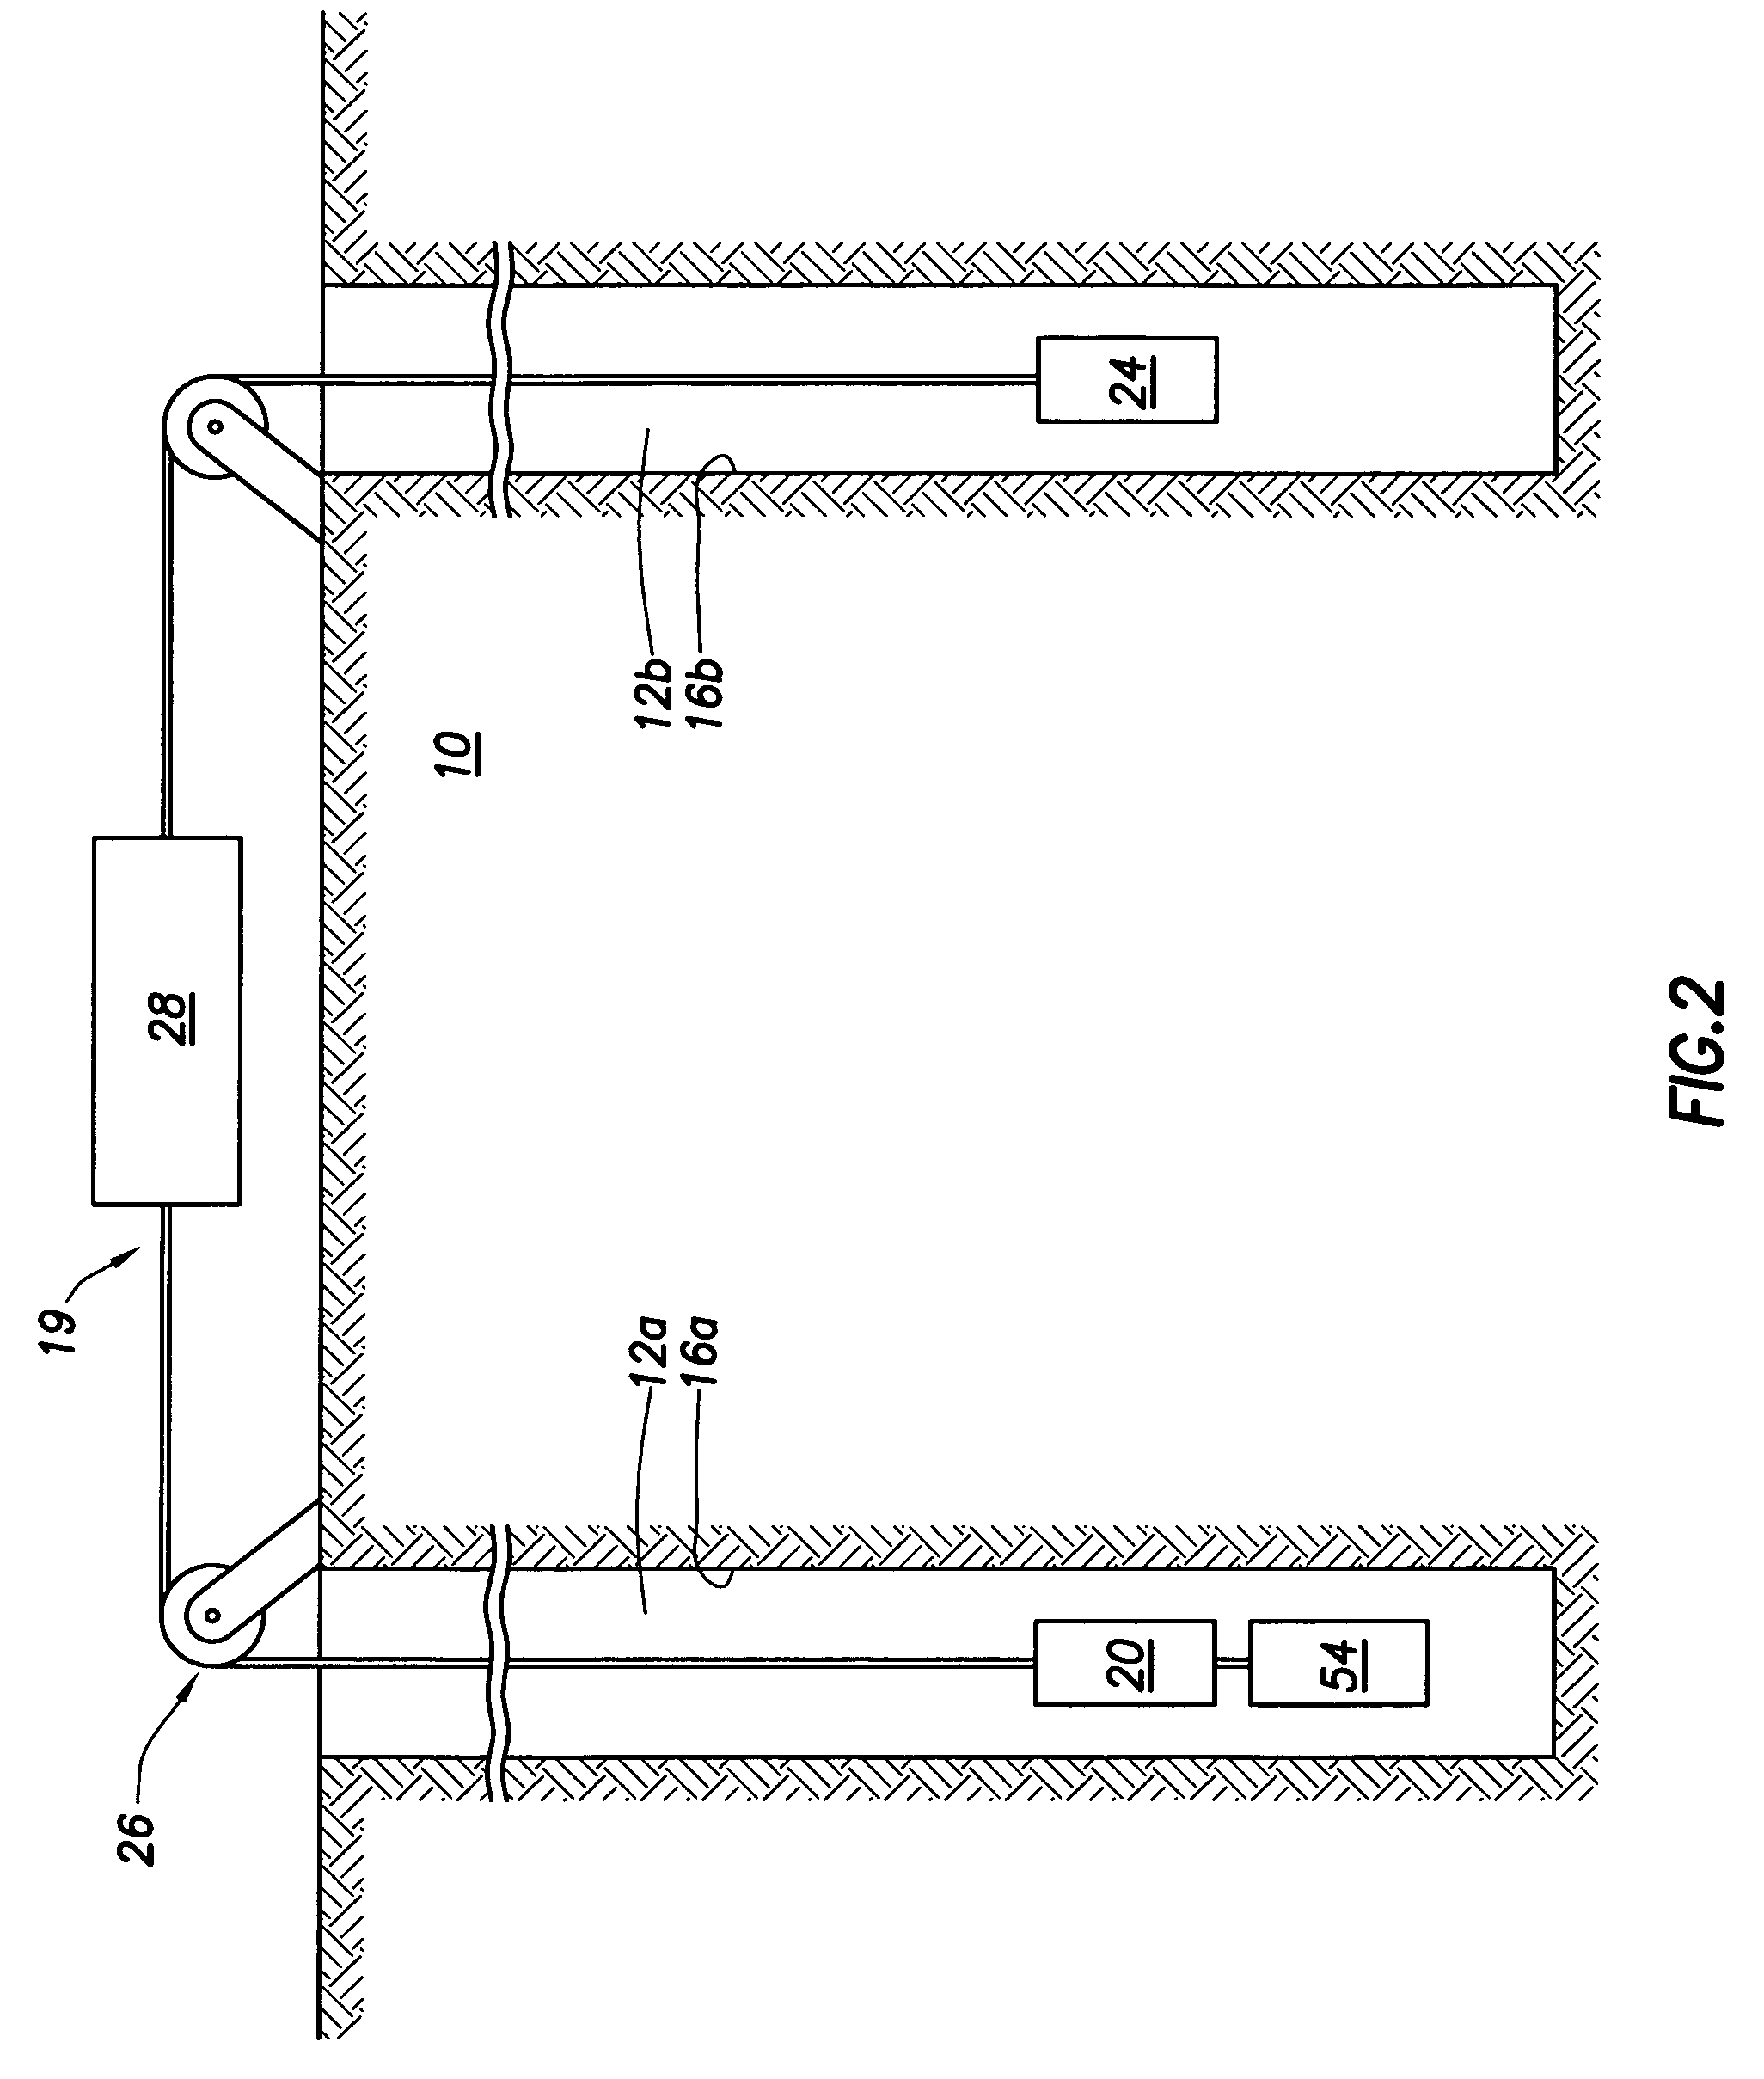 System, apparatus, and method for conducting electromagnetic induction surveys